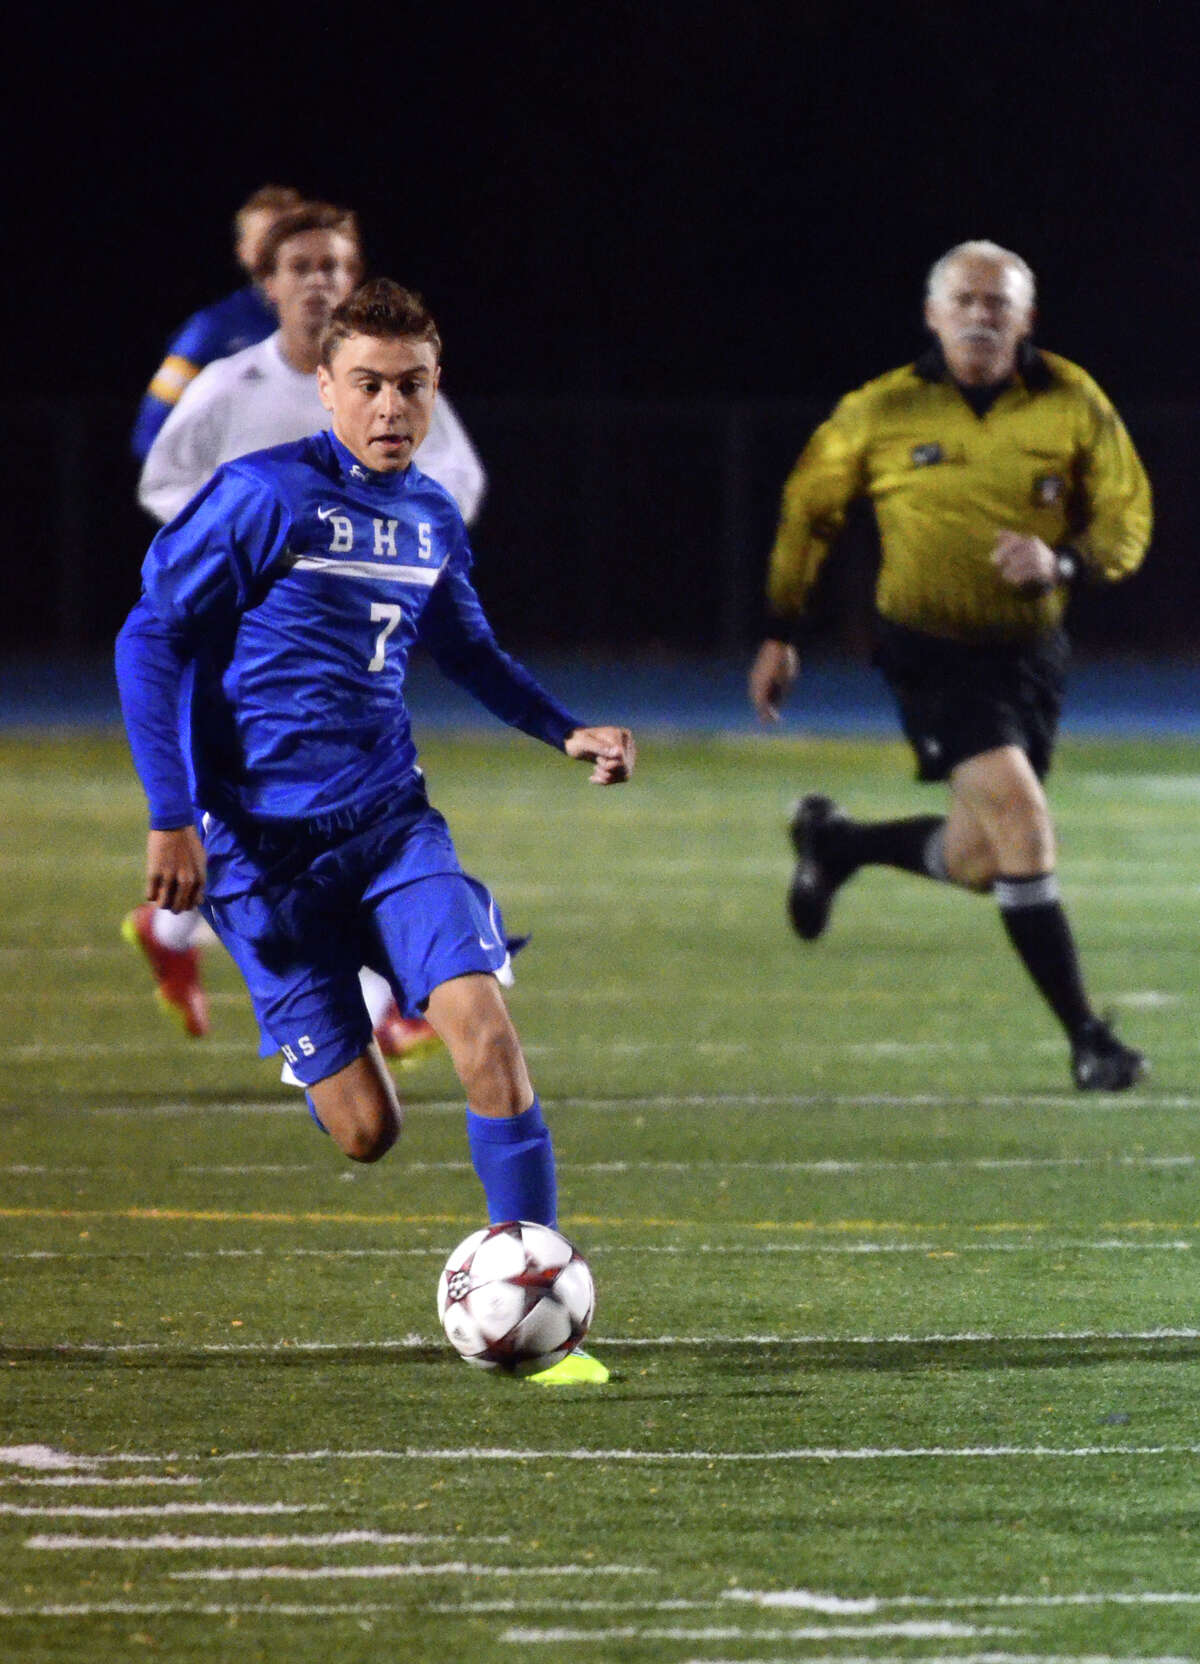 Brookfield's Austin DaSilva (7) controls the ball during the SWC boys soccer final against Newtown at Bunnell High School in Stratford, Conn. on Wednesday, Oct. 30, 2013.